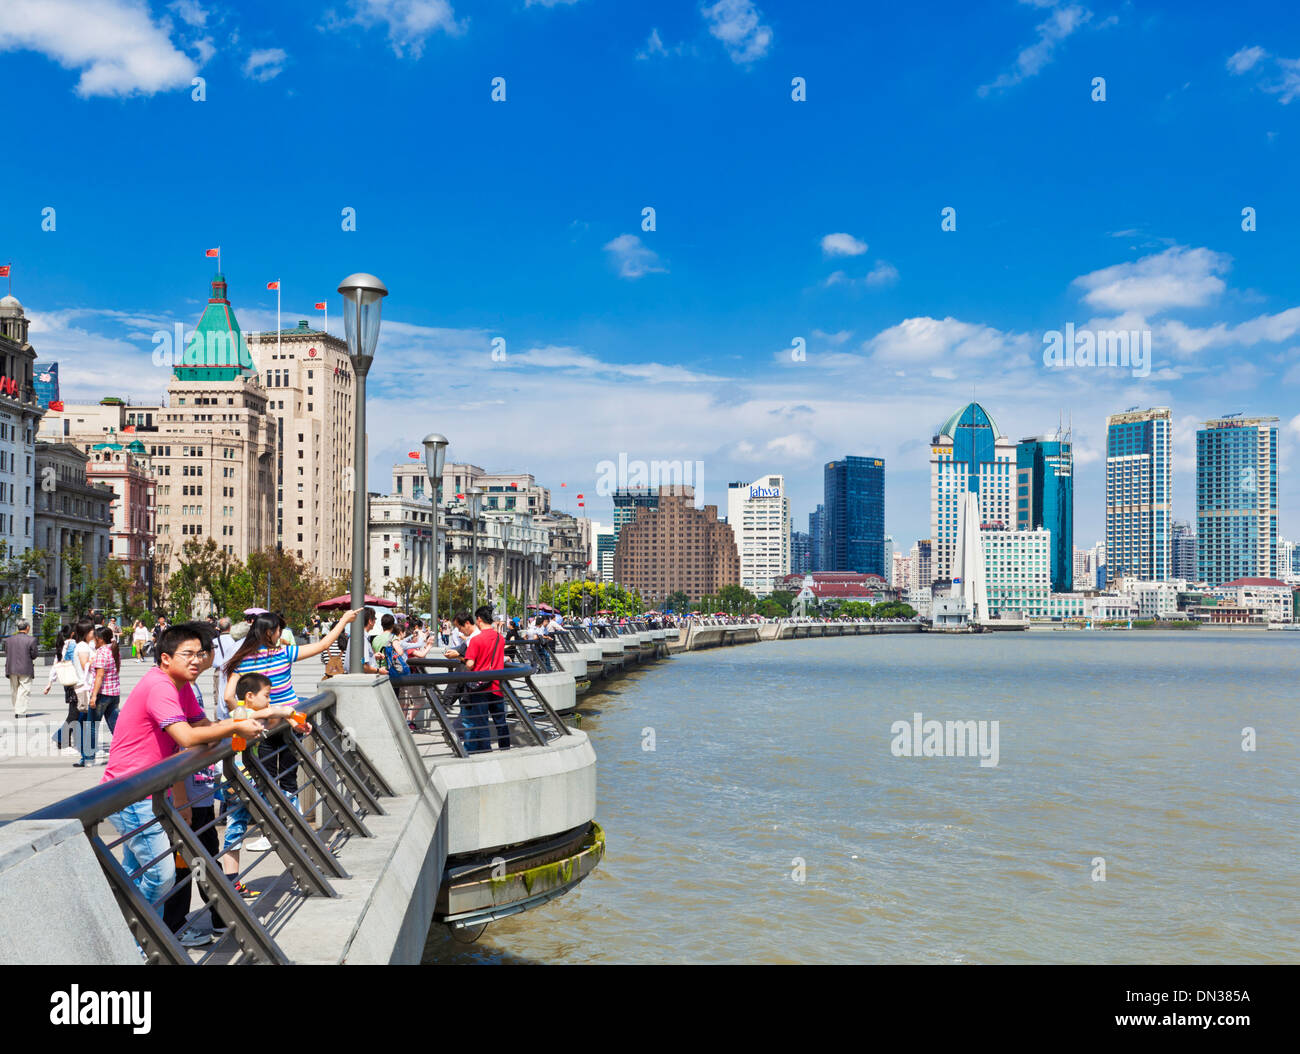 Many people along the Bund promenade Shanghai, Peoples Republic of China, PRC, Asia Stock Photo